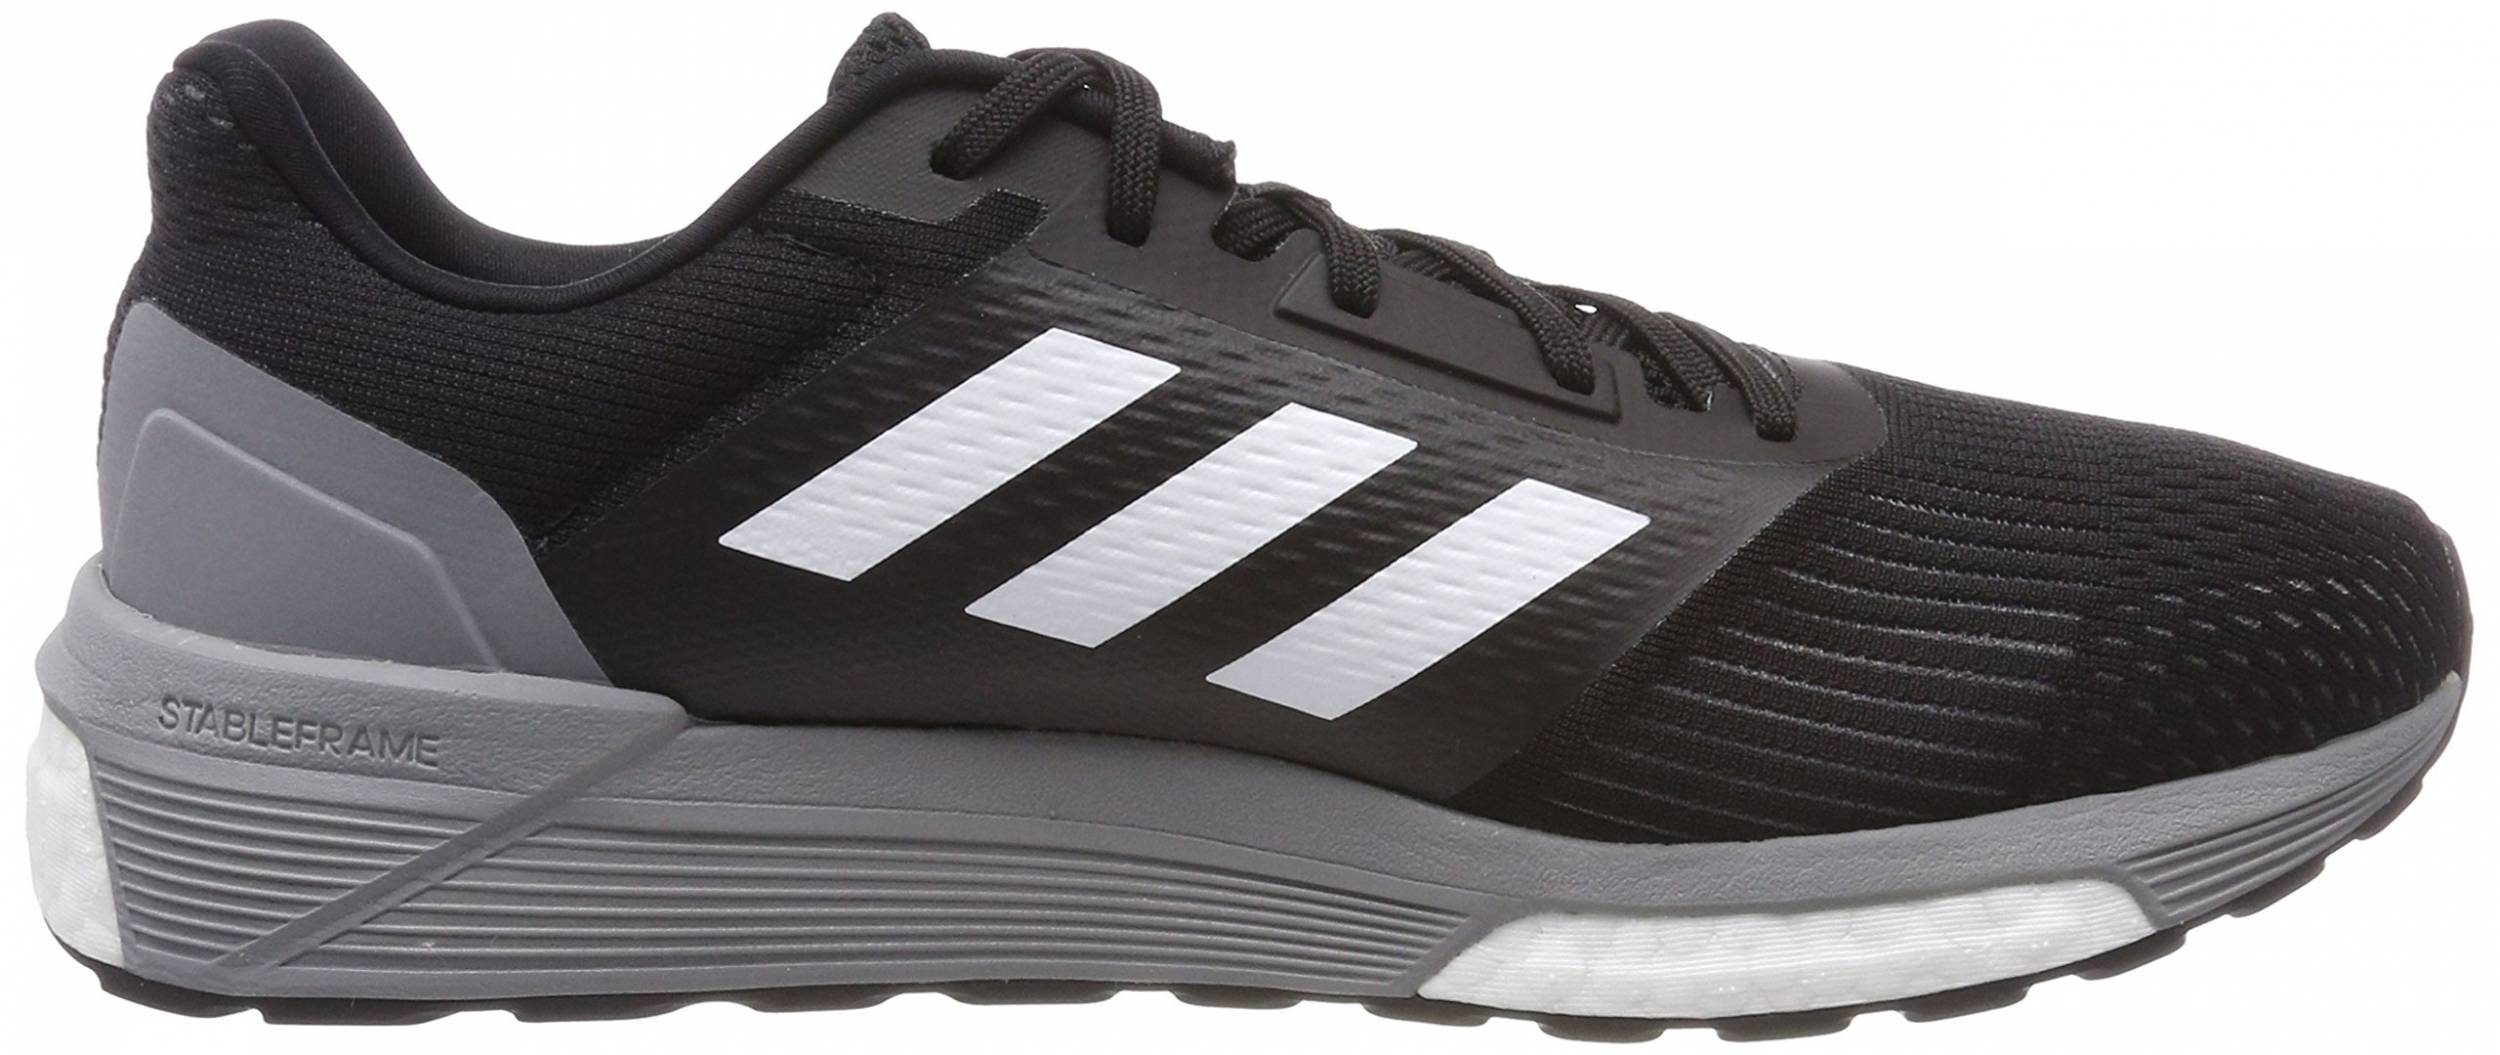 Only $85 + Review of Adidas Response ST | RunRepeat